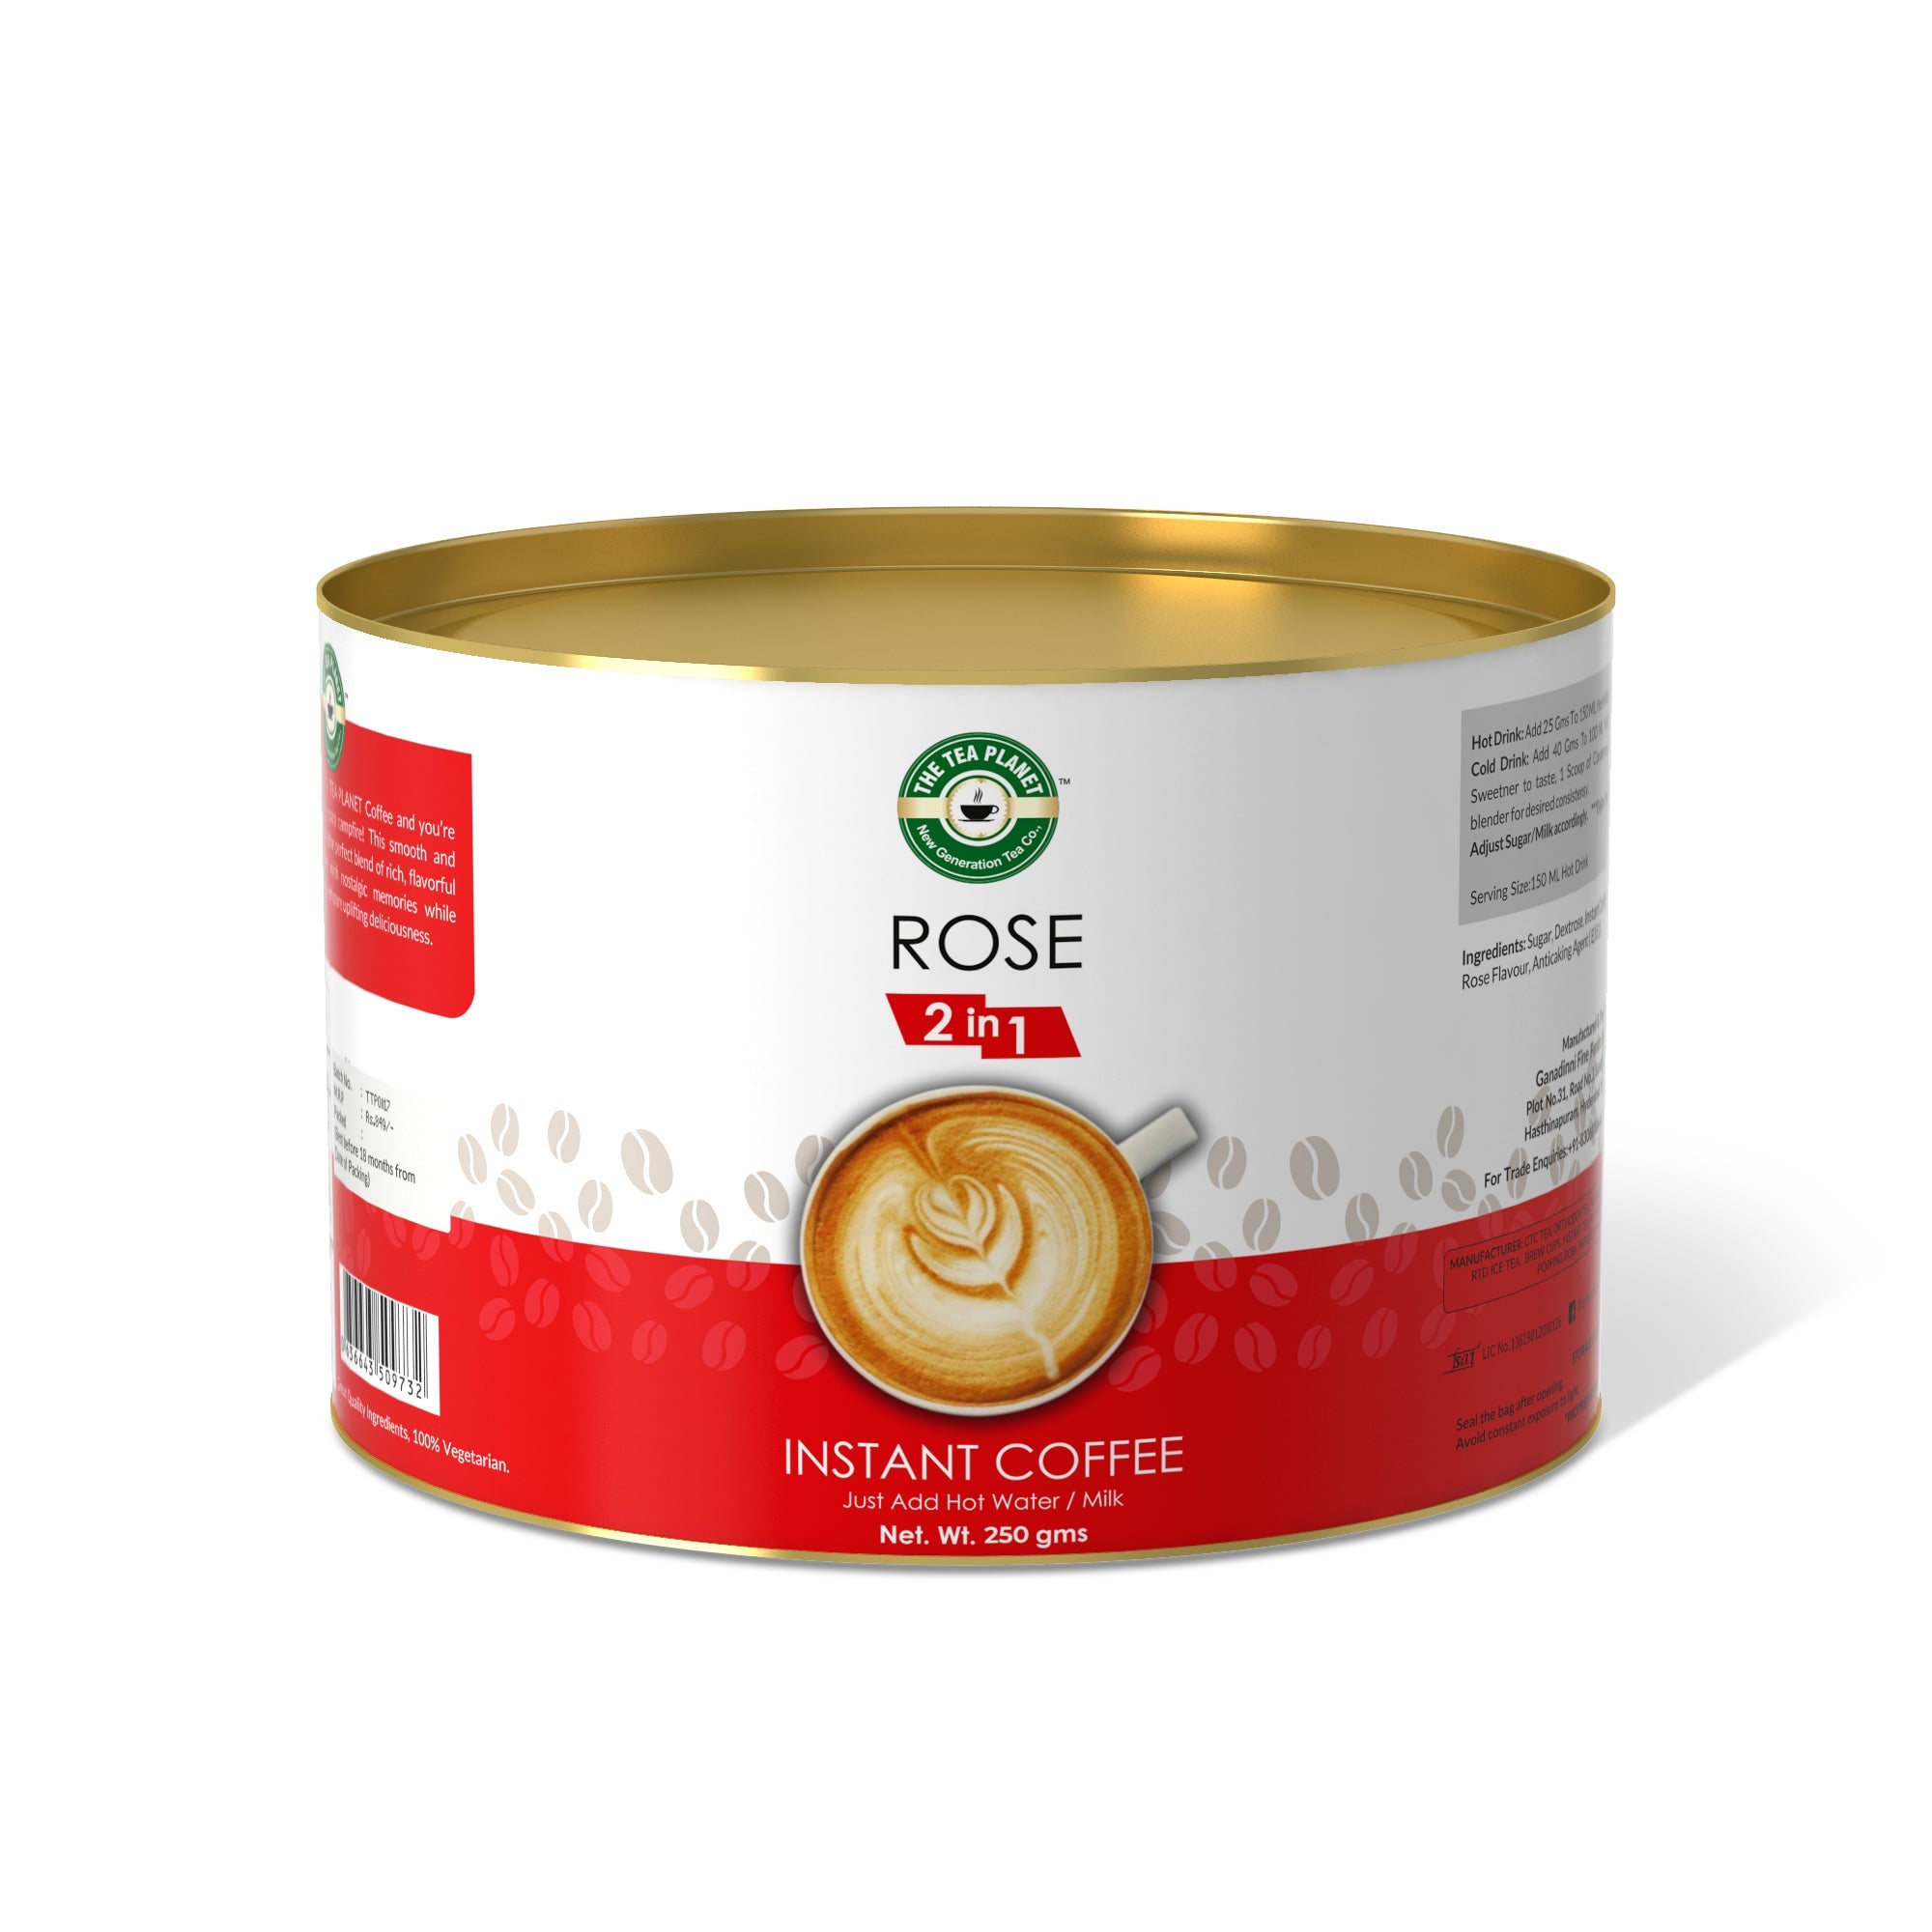 Rose Instant Coffee Premix (2 in 1) - 250 gms